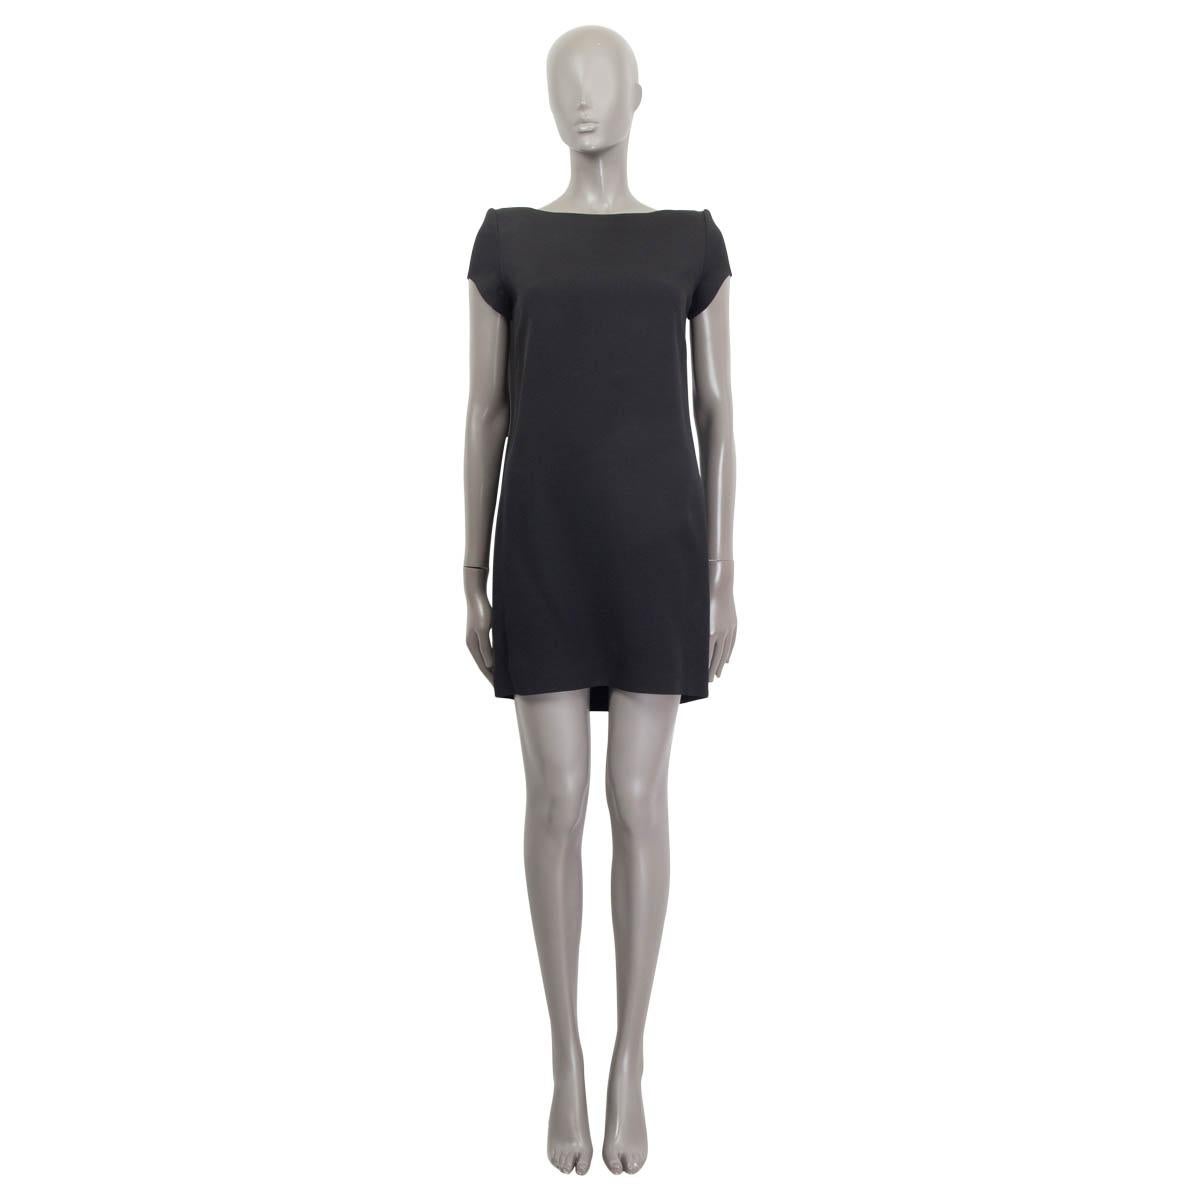 100% authentic Saint Laurent short sleeve dress in black acetate (50%), viscose (37%) and silk (13%). Features padded shoulders. Opens with a concealed zipper and a hook at the back. Lined in black silk (100%). Has been worn and is in excellent